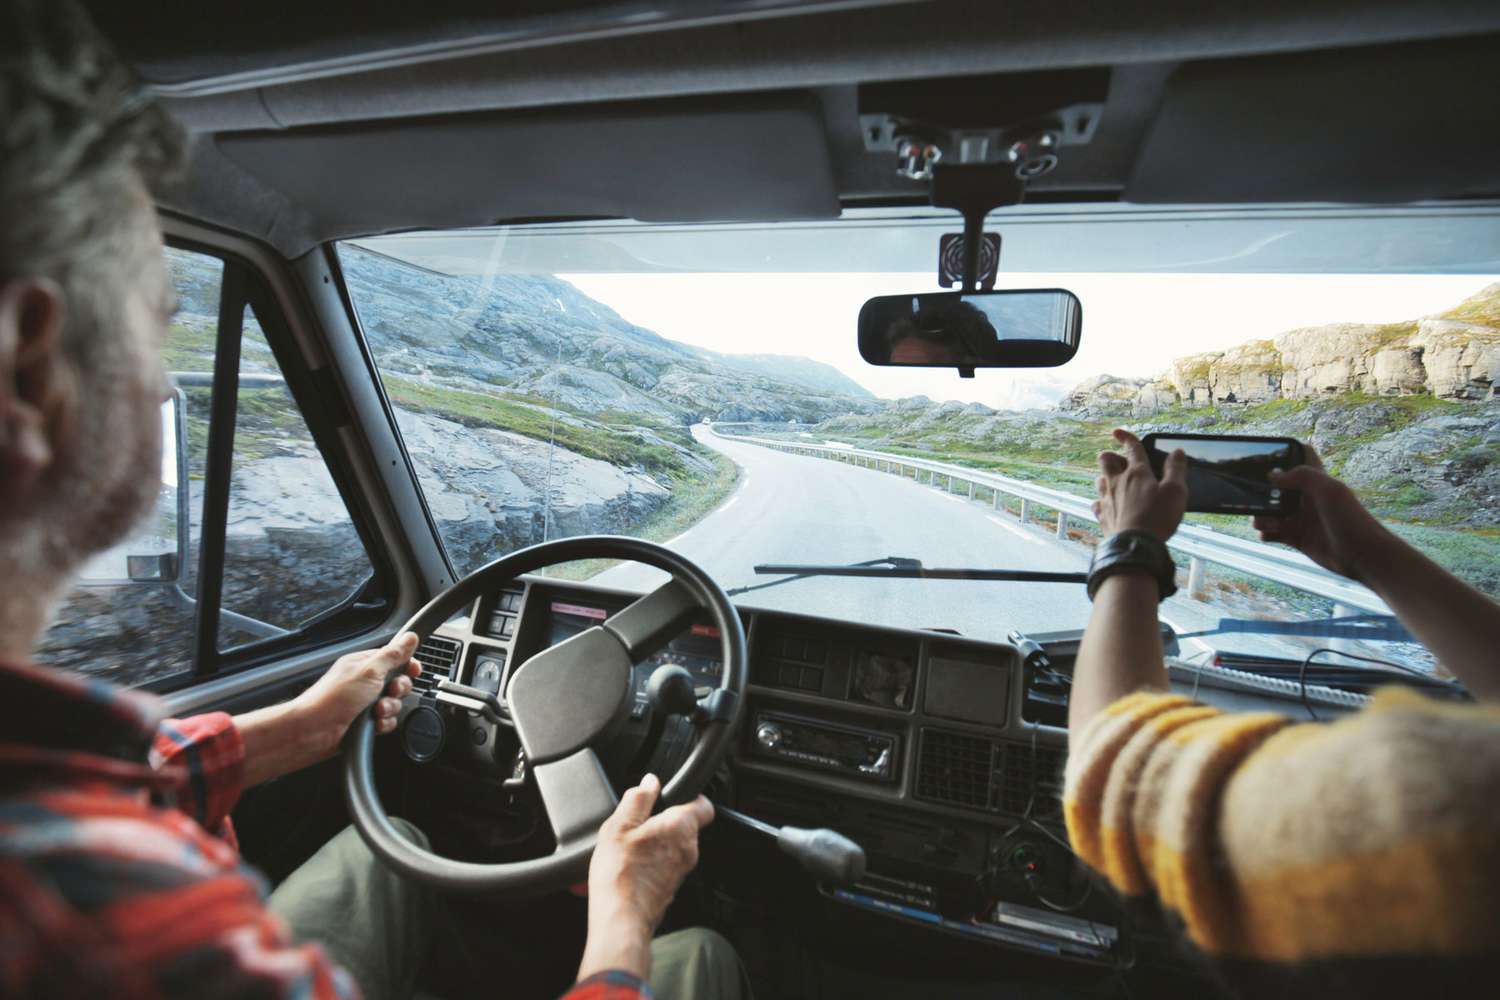 How to Choose the Right RV for Your Next Road Trip, According to Experts